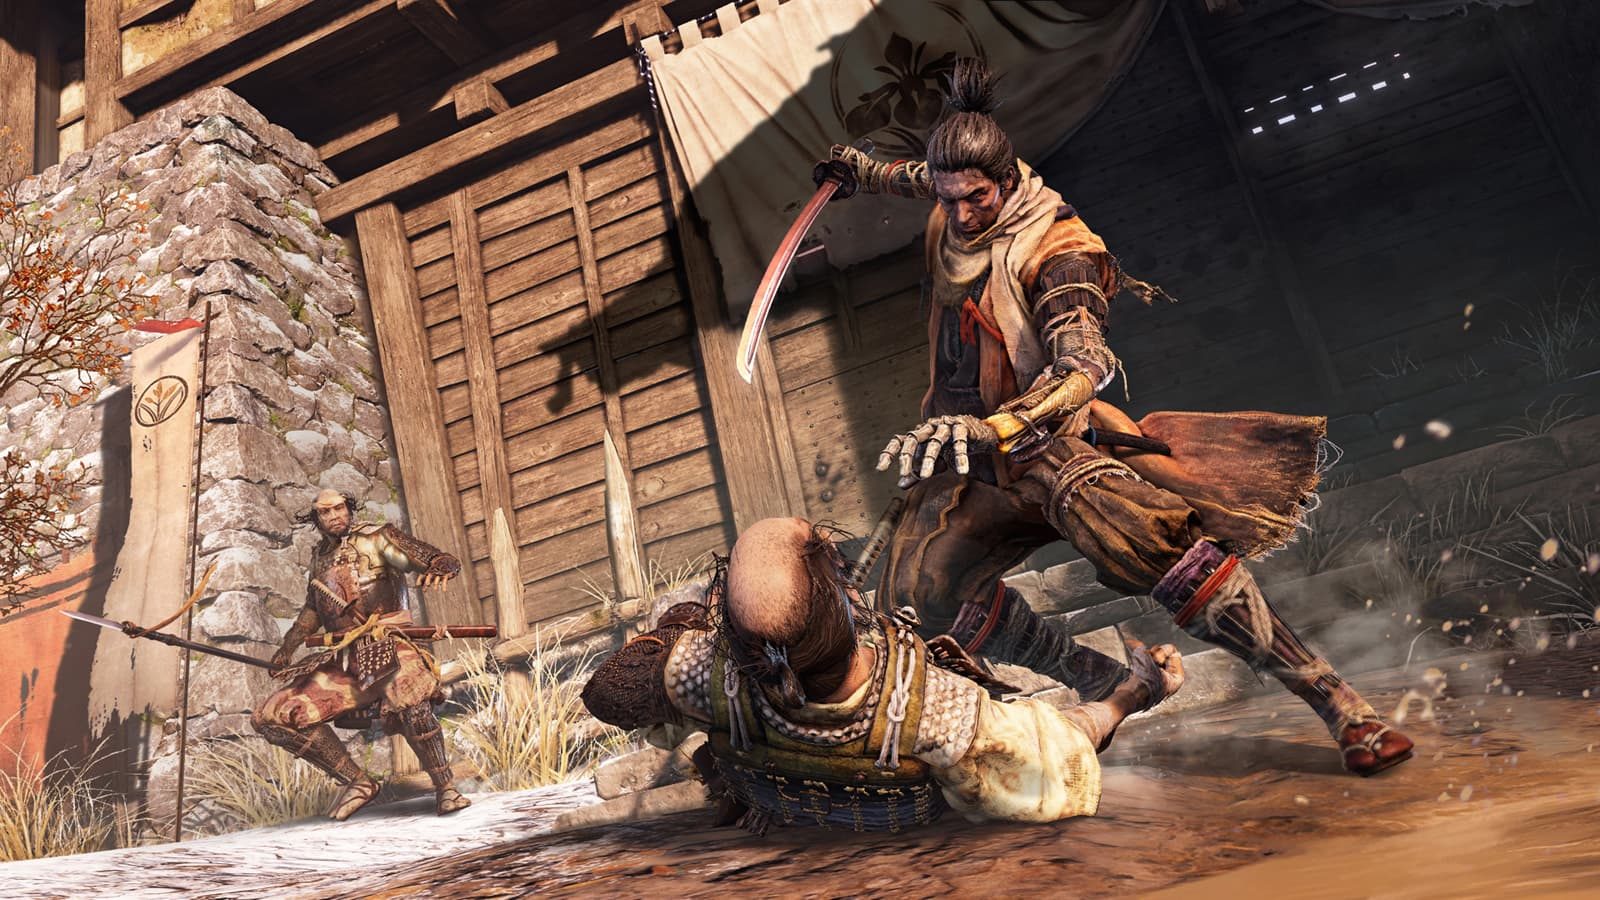 Sekiro: Shadows Die Twice – Exclusive First Hands-on Preview